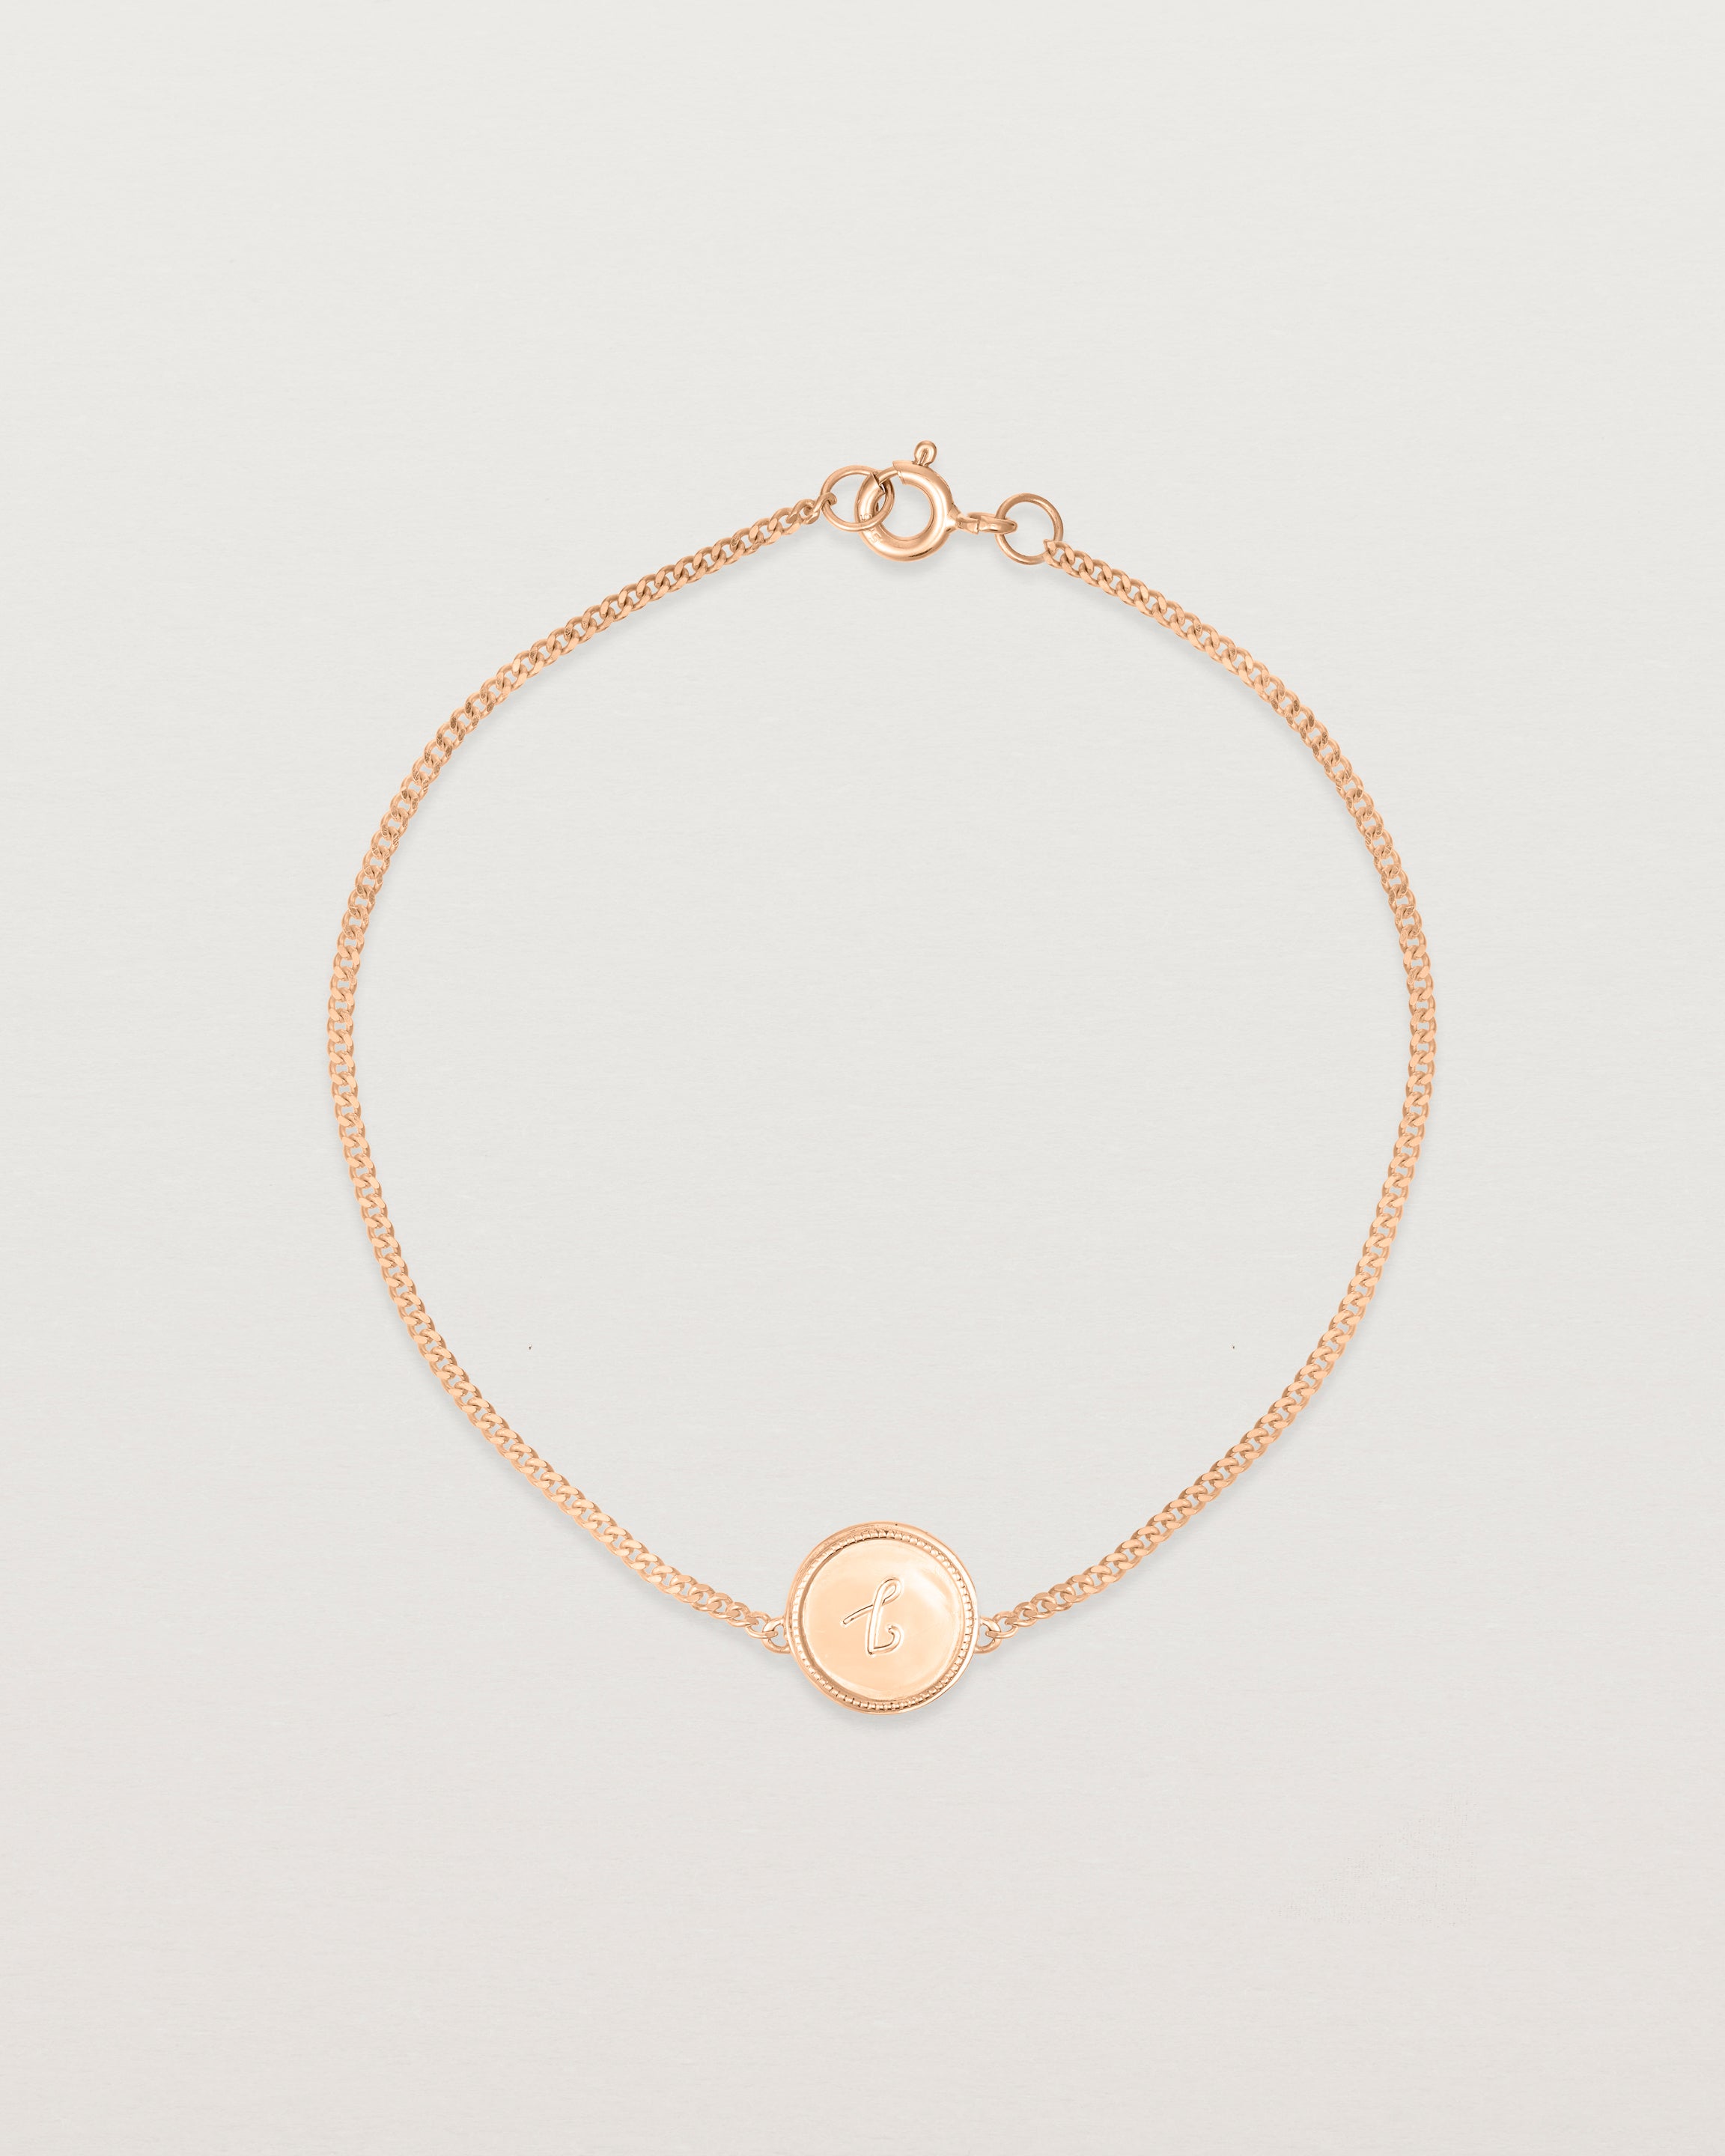 Top down view of the Precious Initial Bracelet in rose gold.